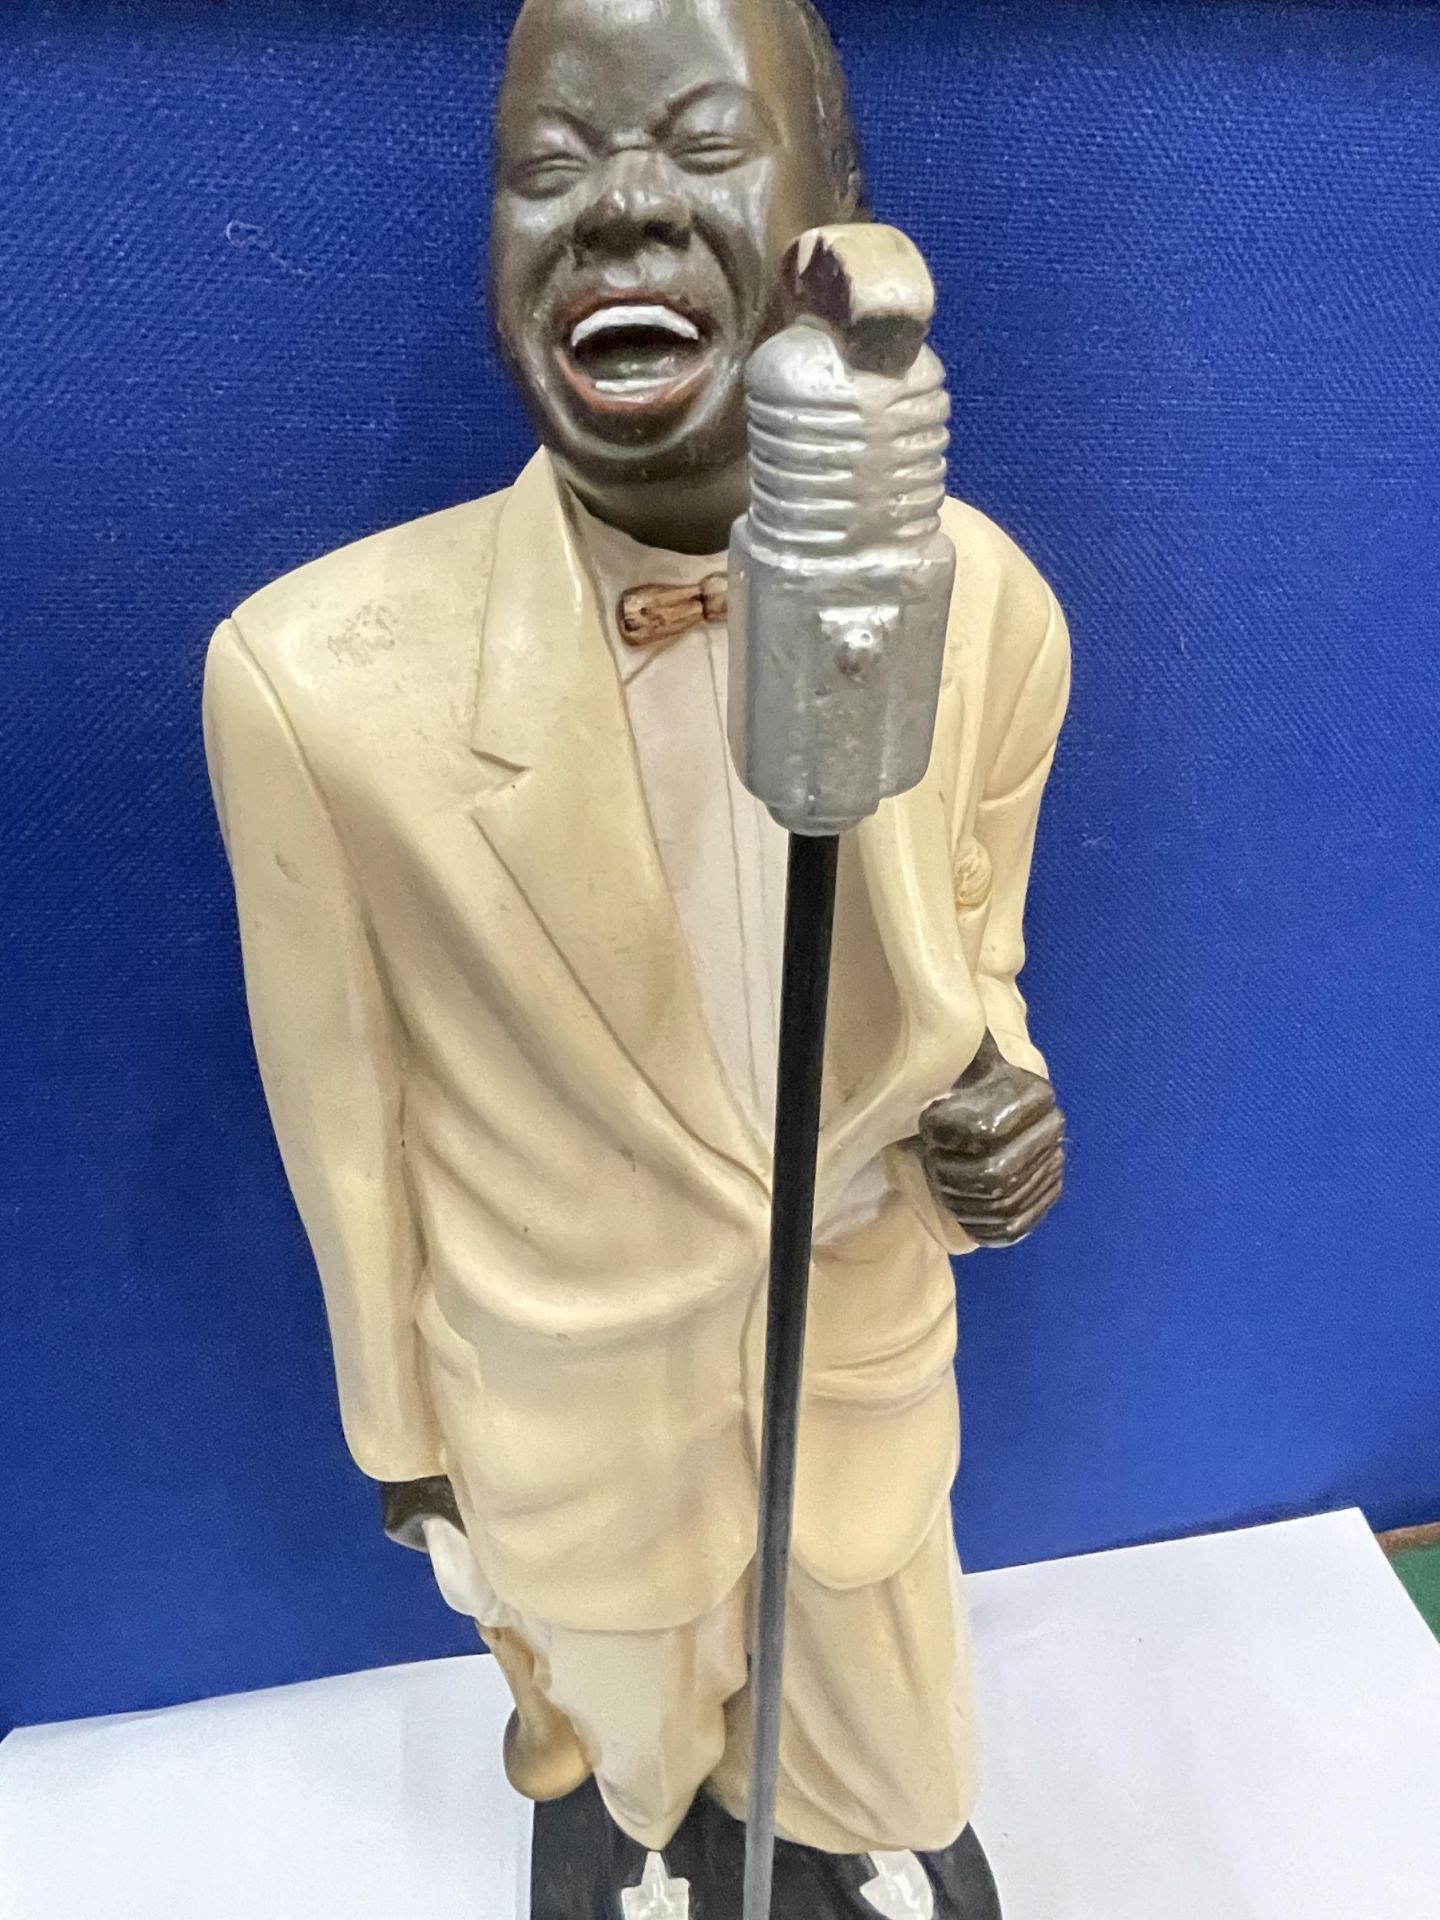 A HEAVY LOUIS ARMSTRONG FIGURE WITH TRUMPET AND MICROPHONE 22 INCHES TALL - Image 3 of 4